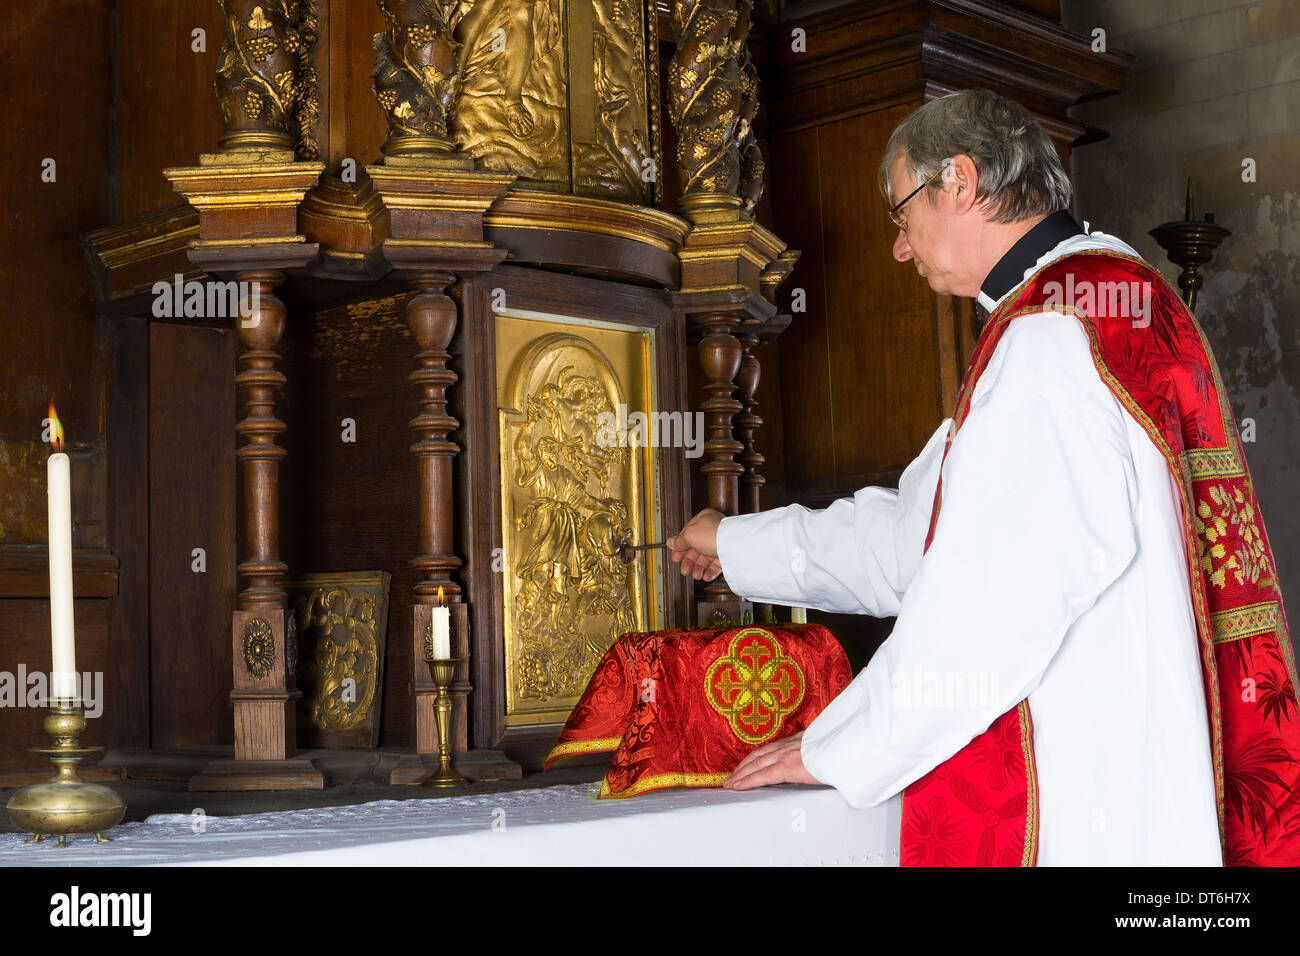 Baroque antique tabernacle with priest returning the chalice after holy mass in a medieval church Stock Photo